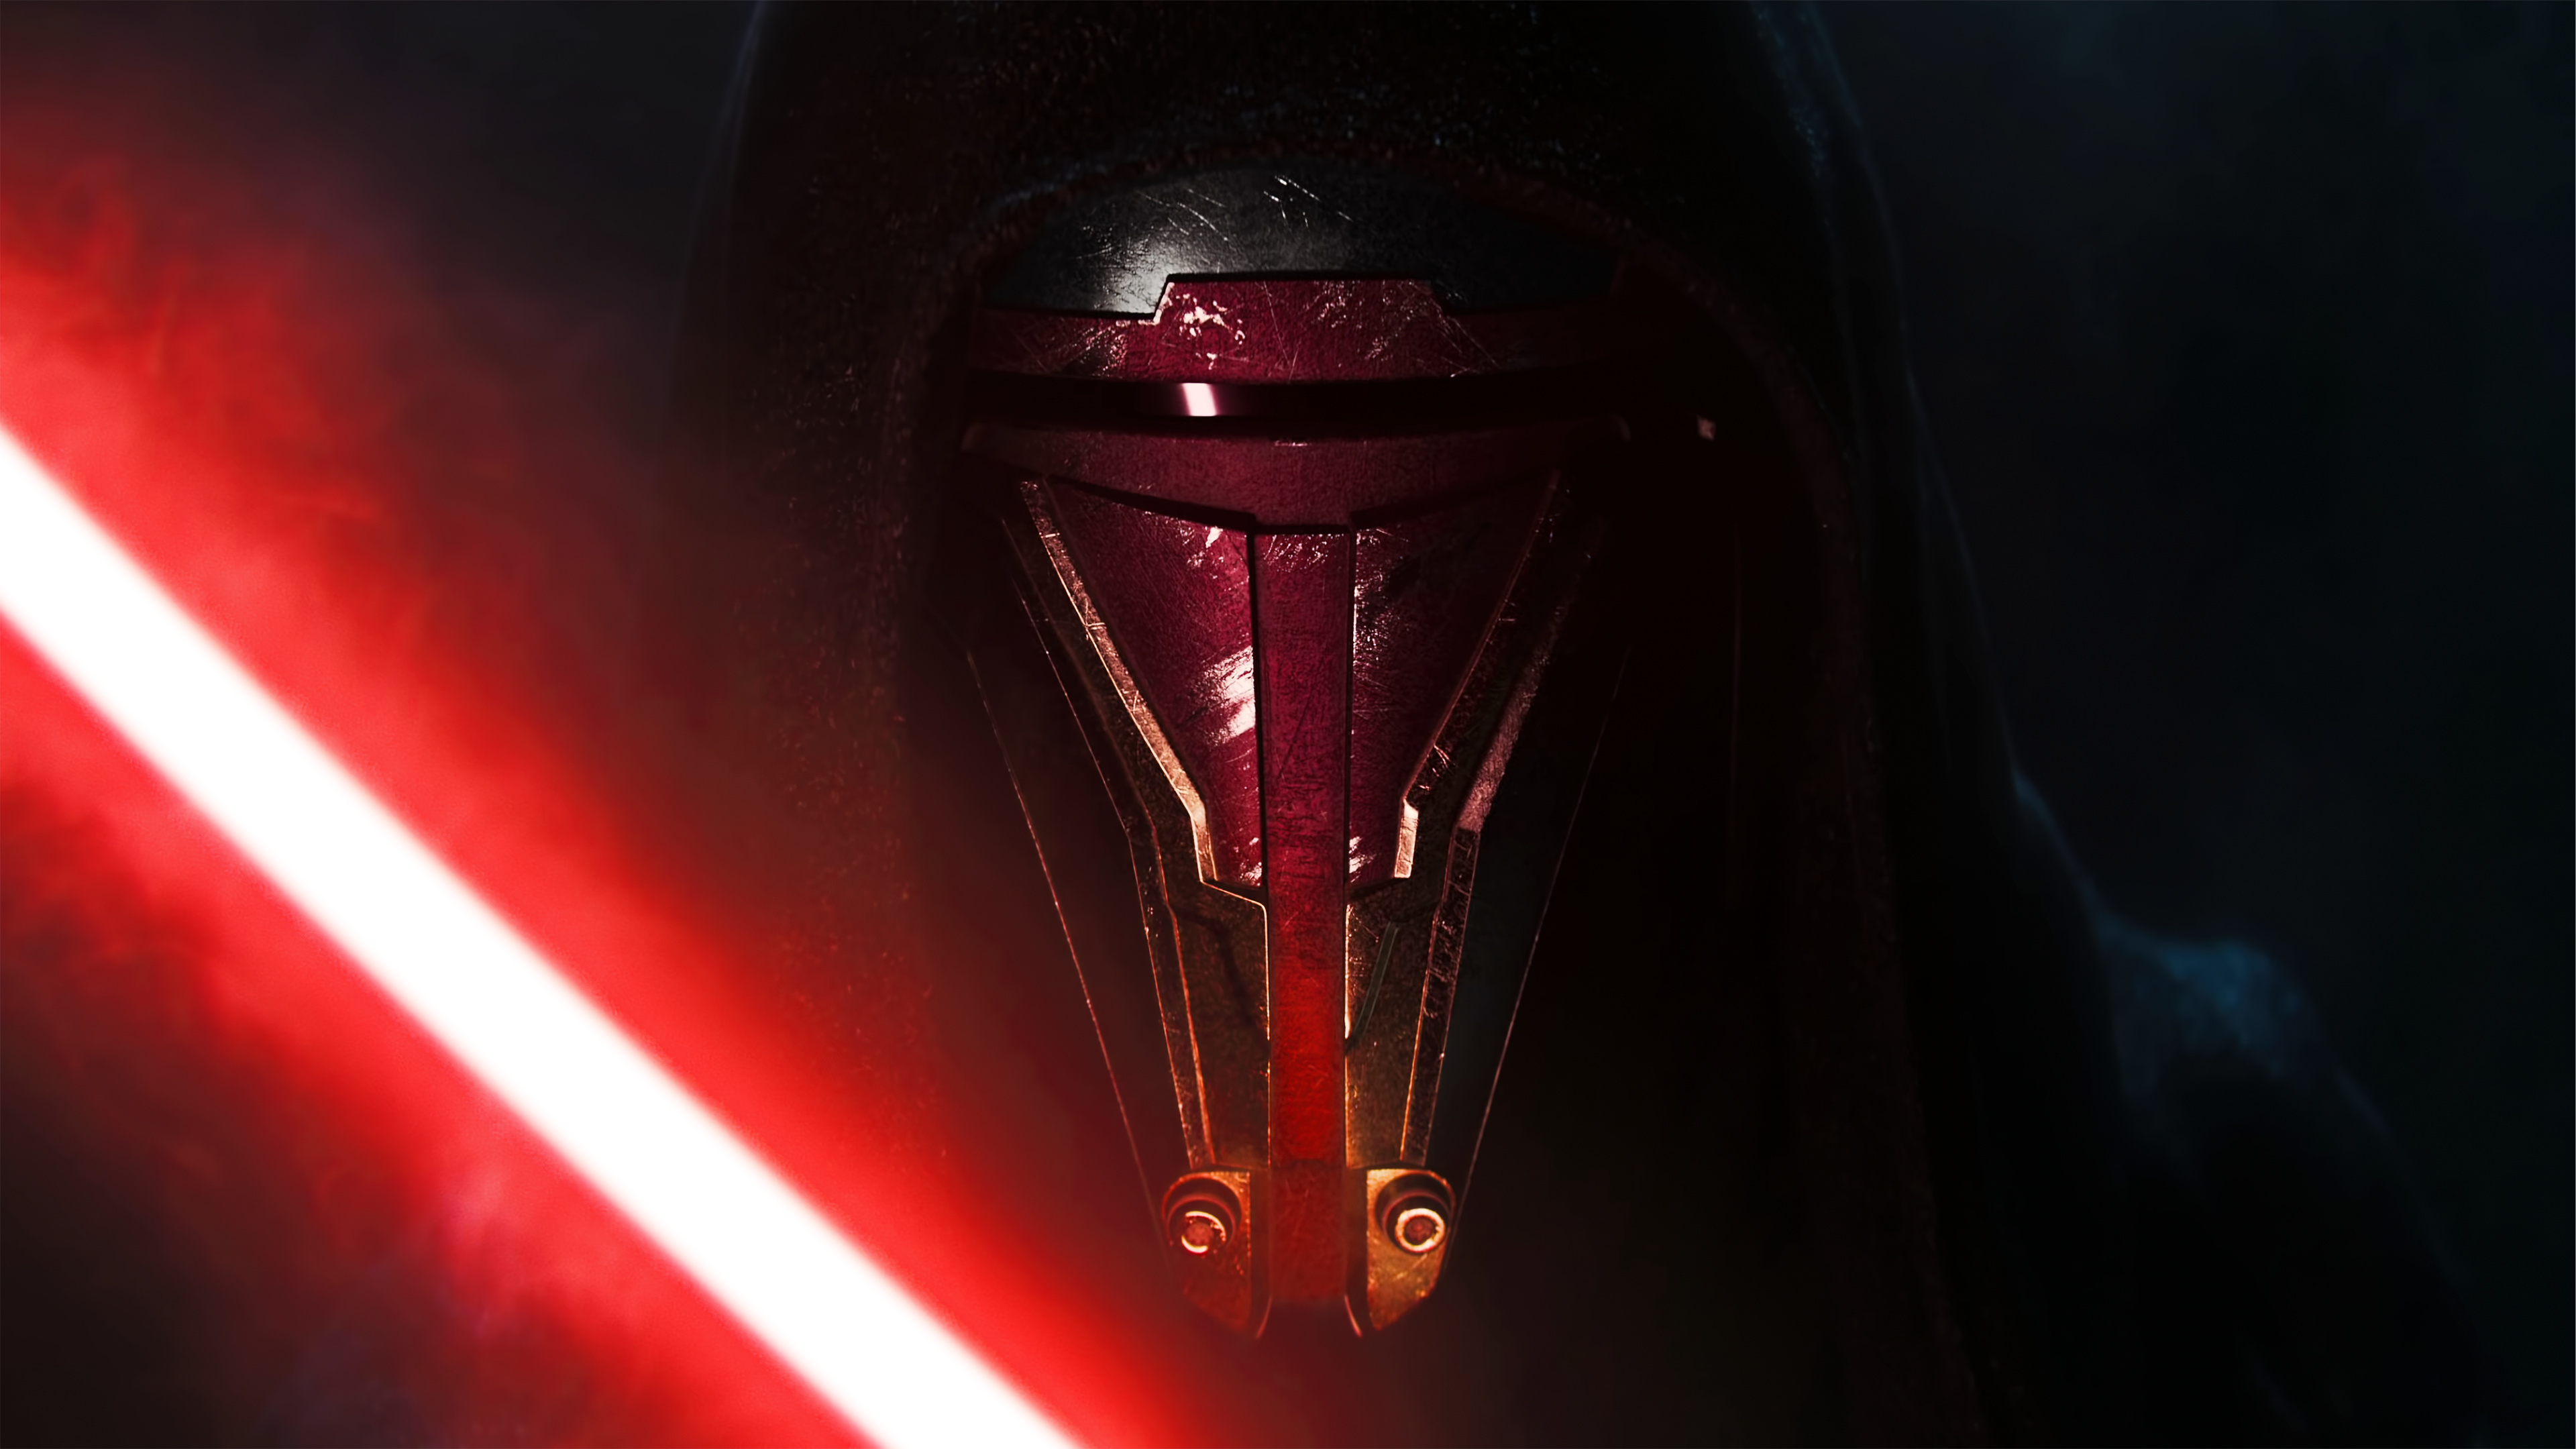 Darth Revan: The player character of the role-playing video game Star Wars: Knights of the Old Republic. 3840x2160 4K Wallpaper.